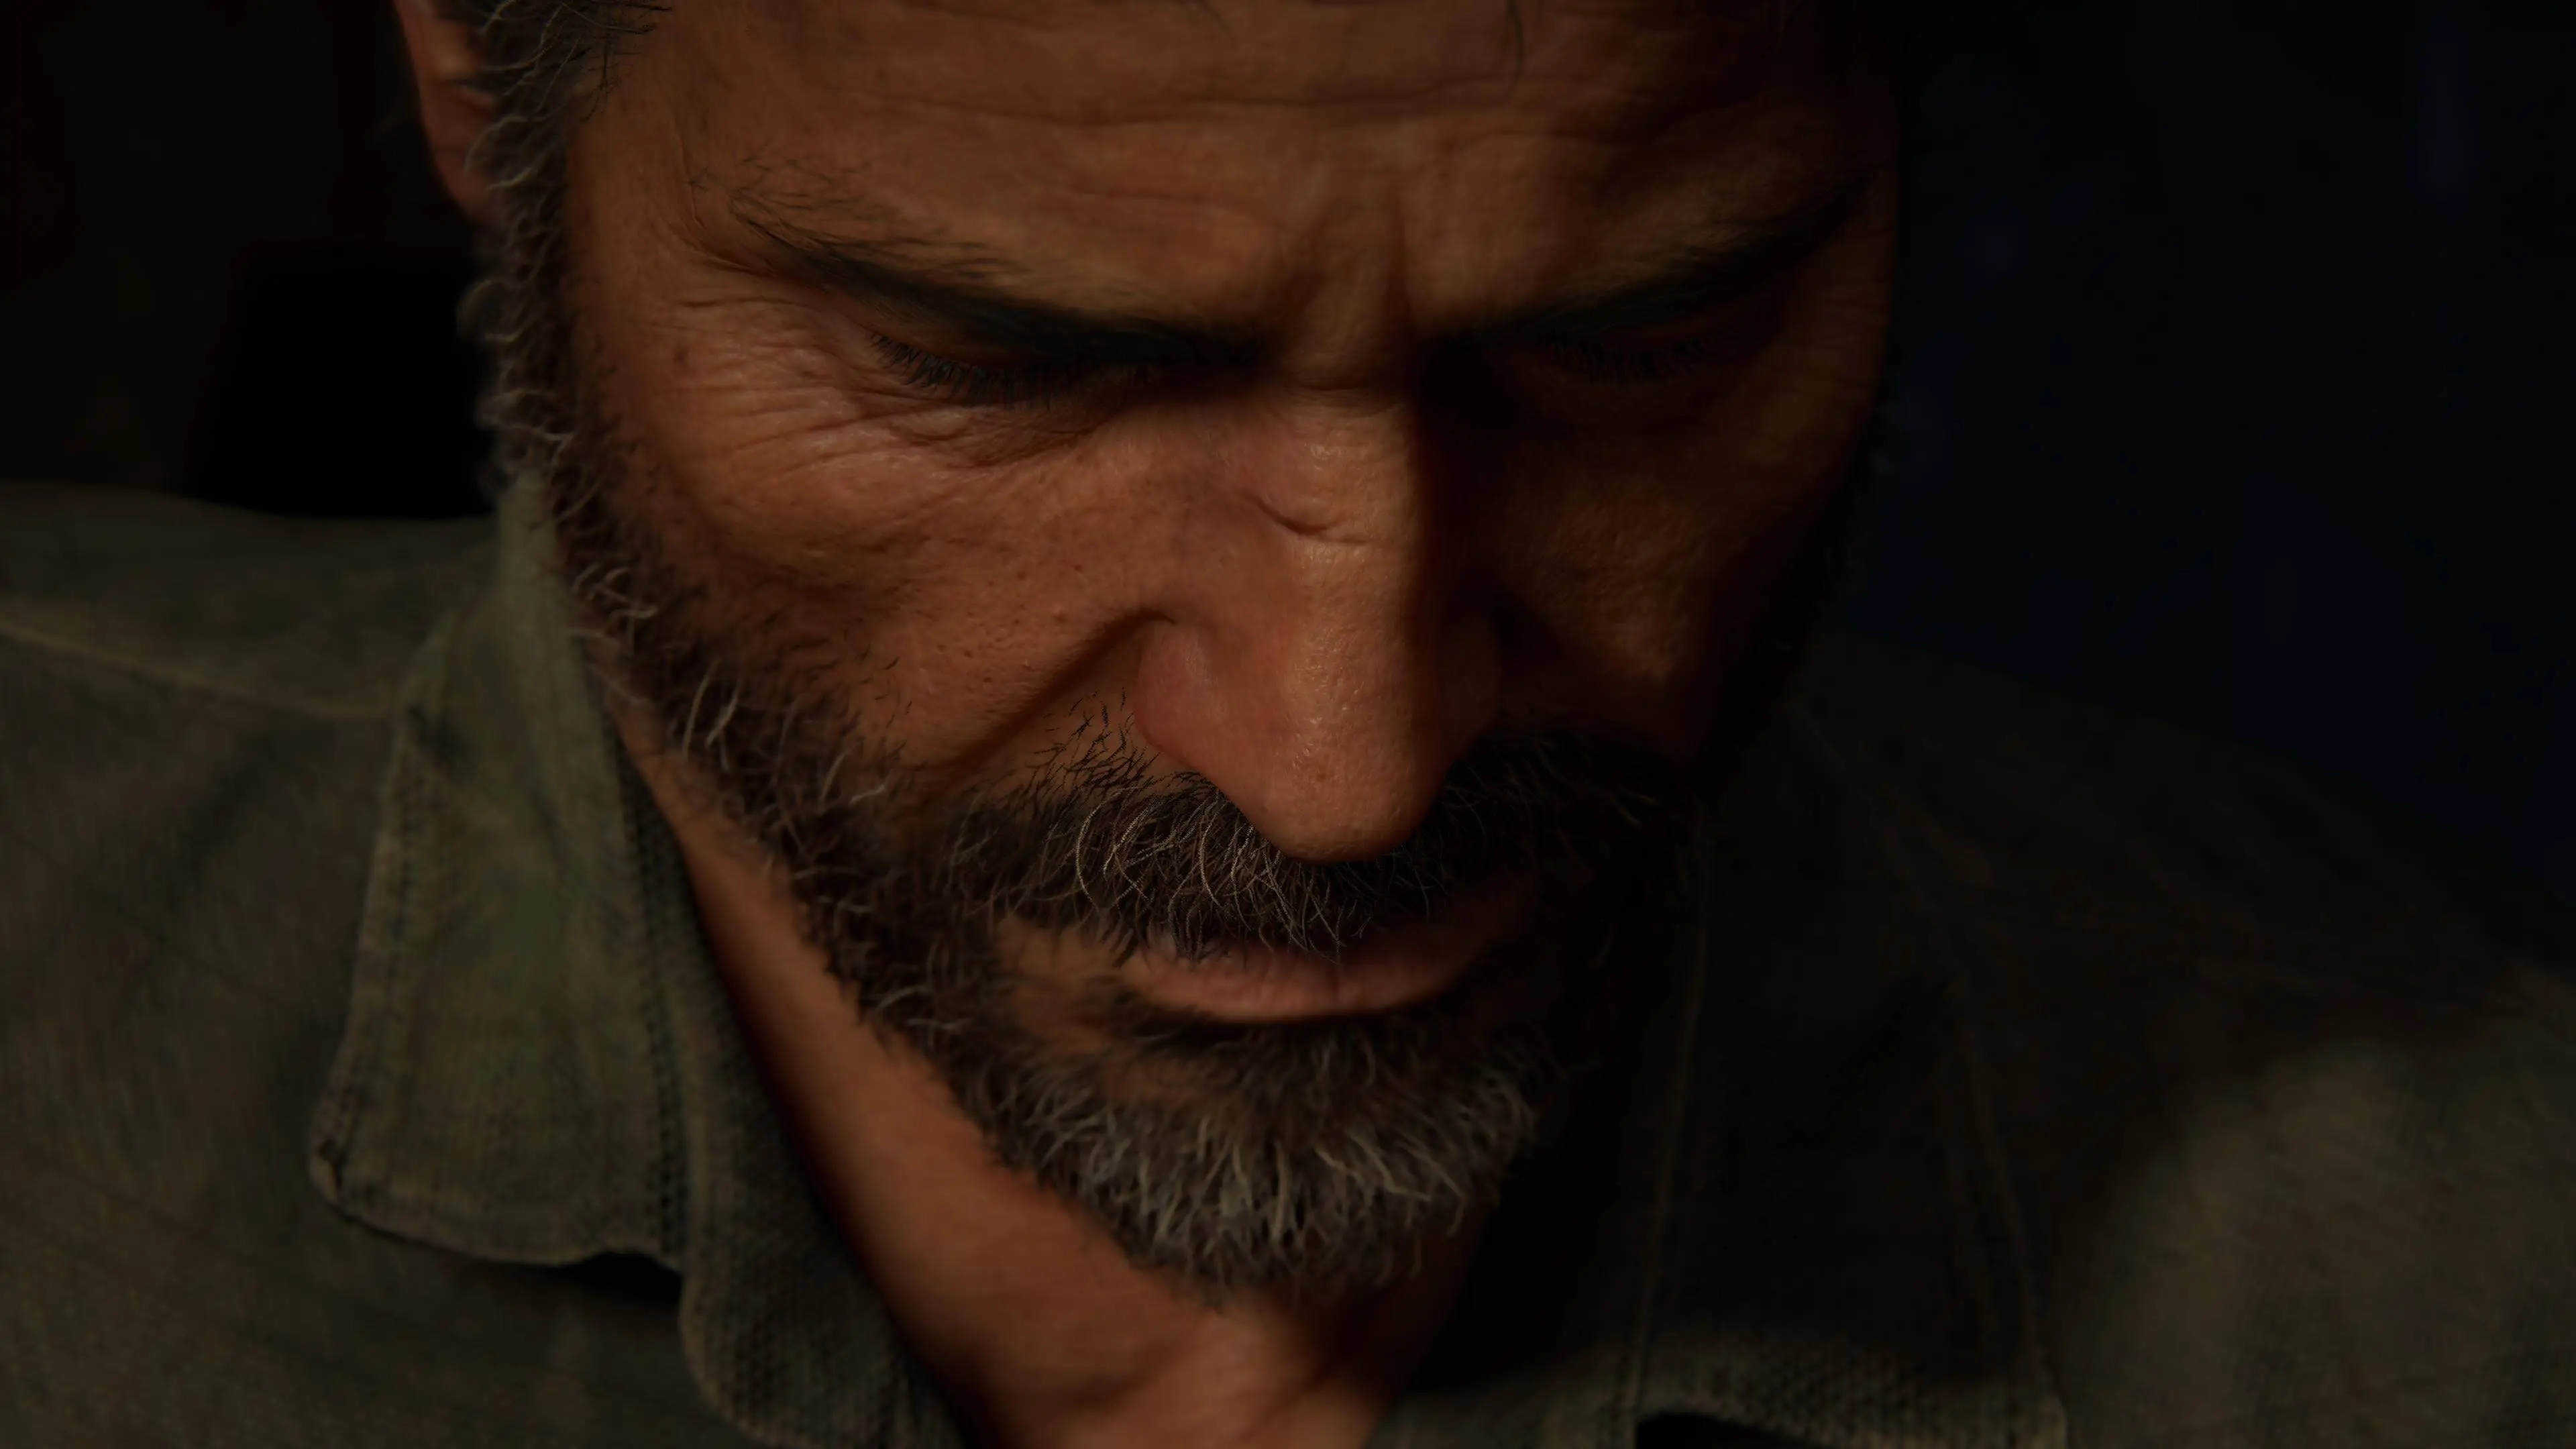 Joel's face, marked by painful memories